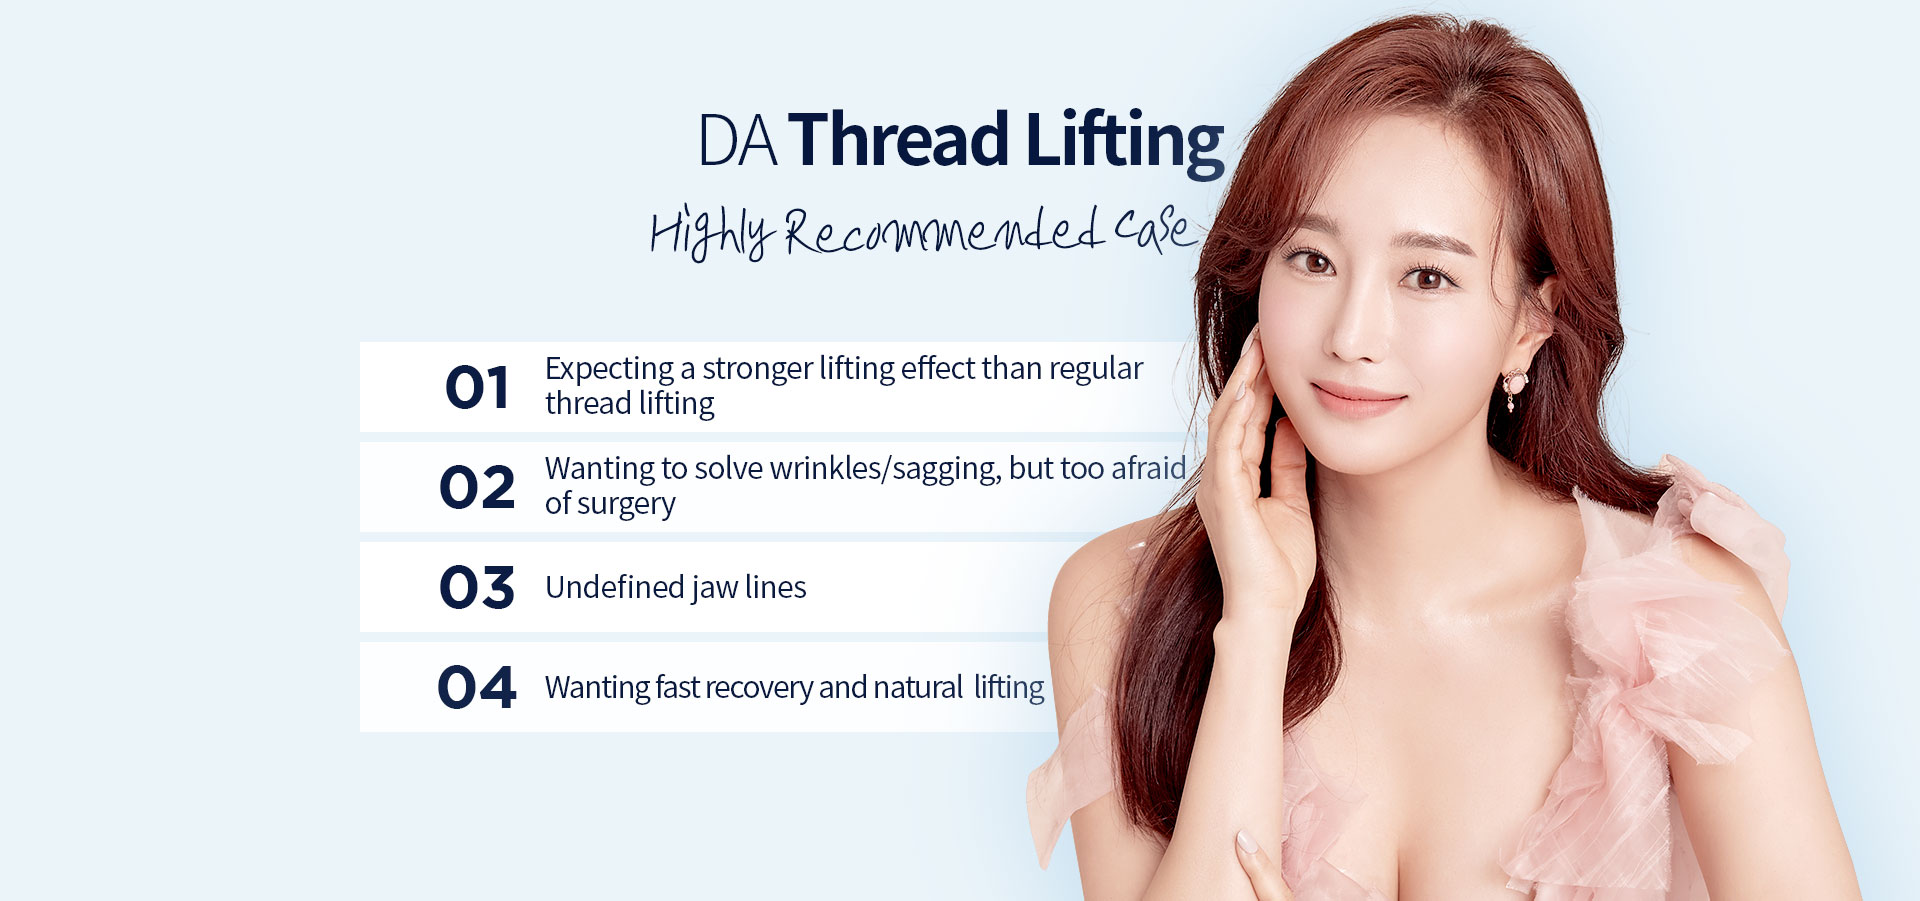 DA Thread Lifting Highly Recommended Case